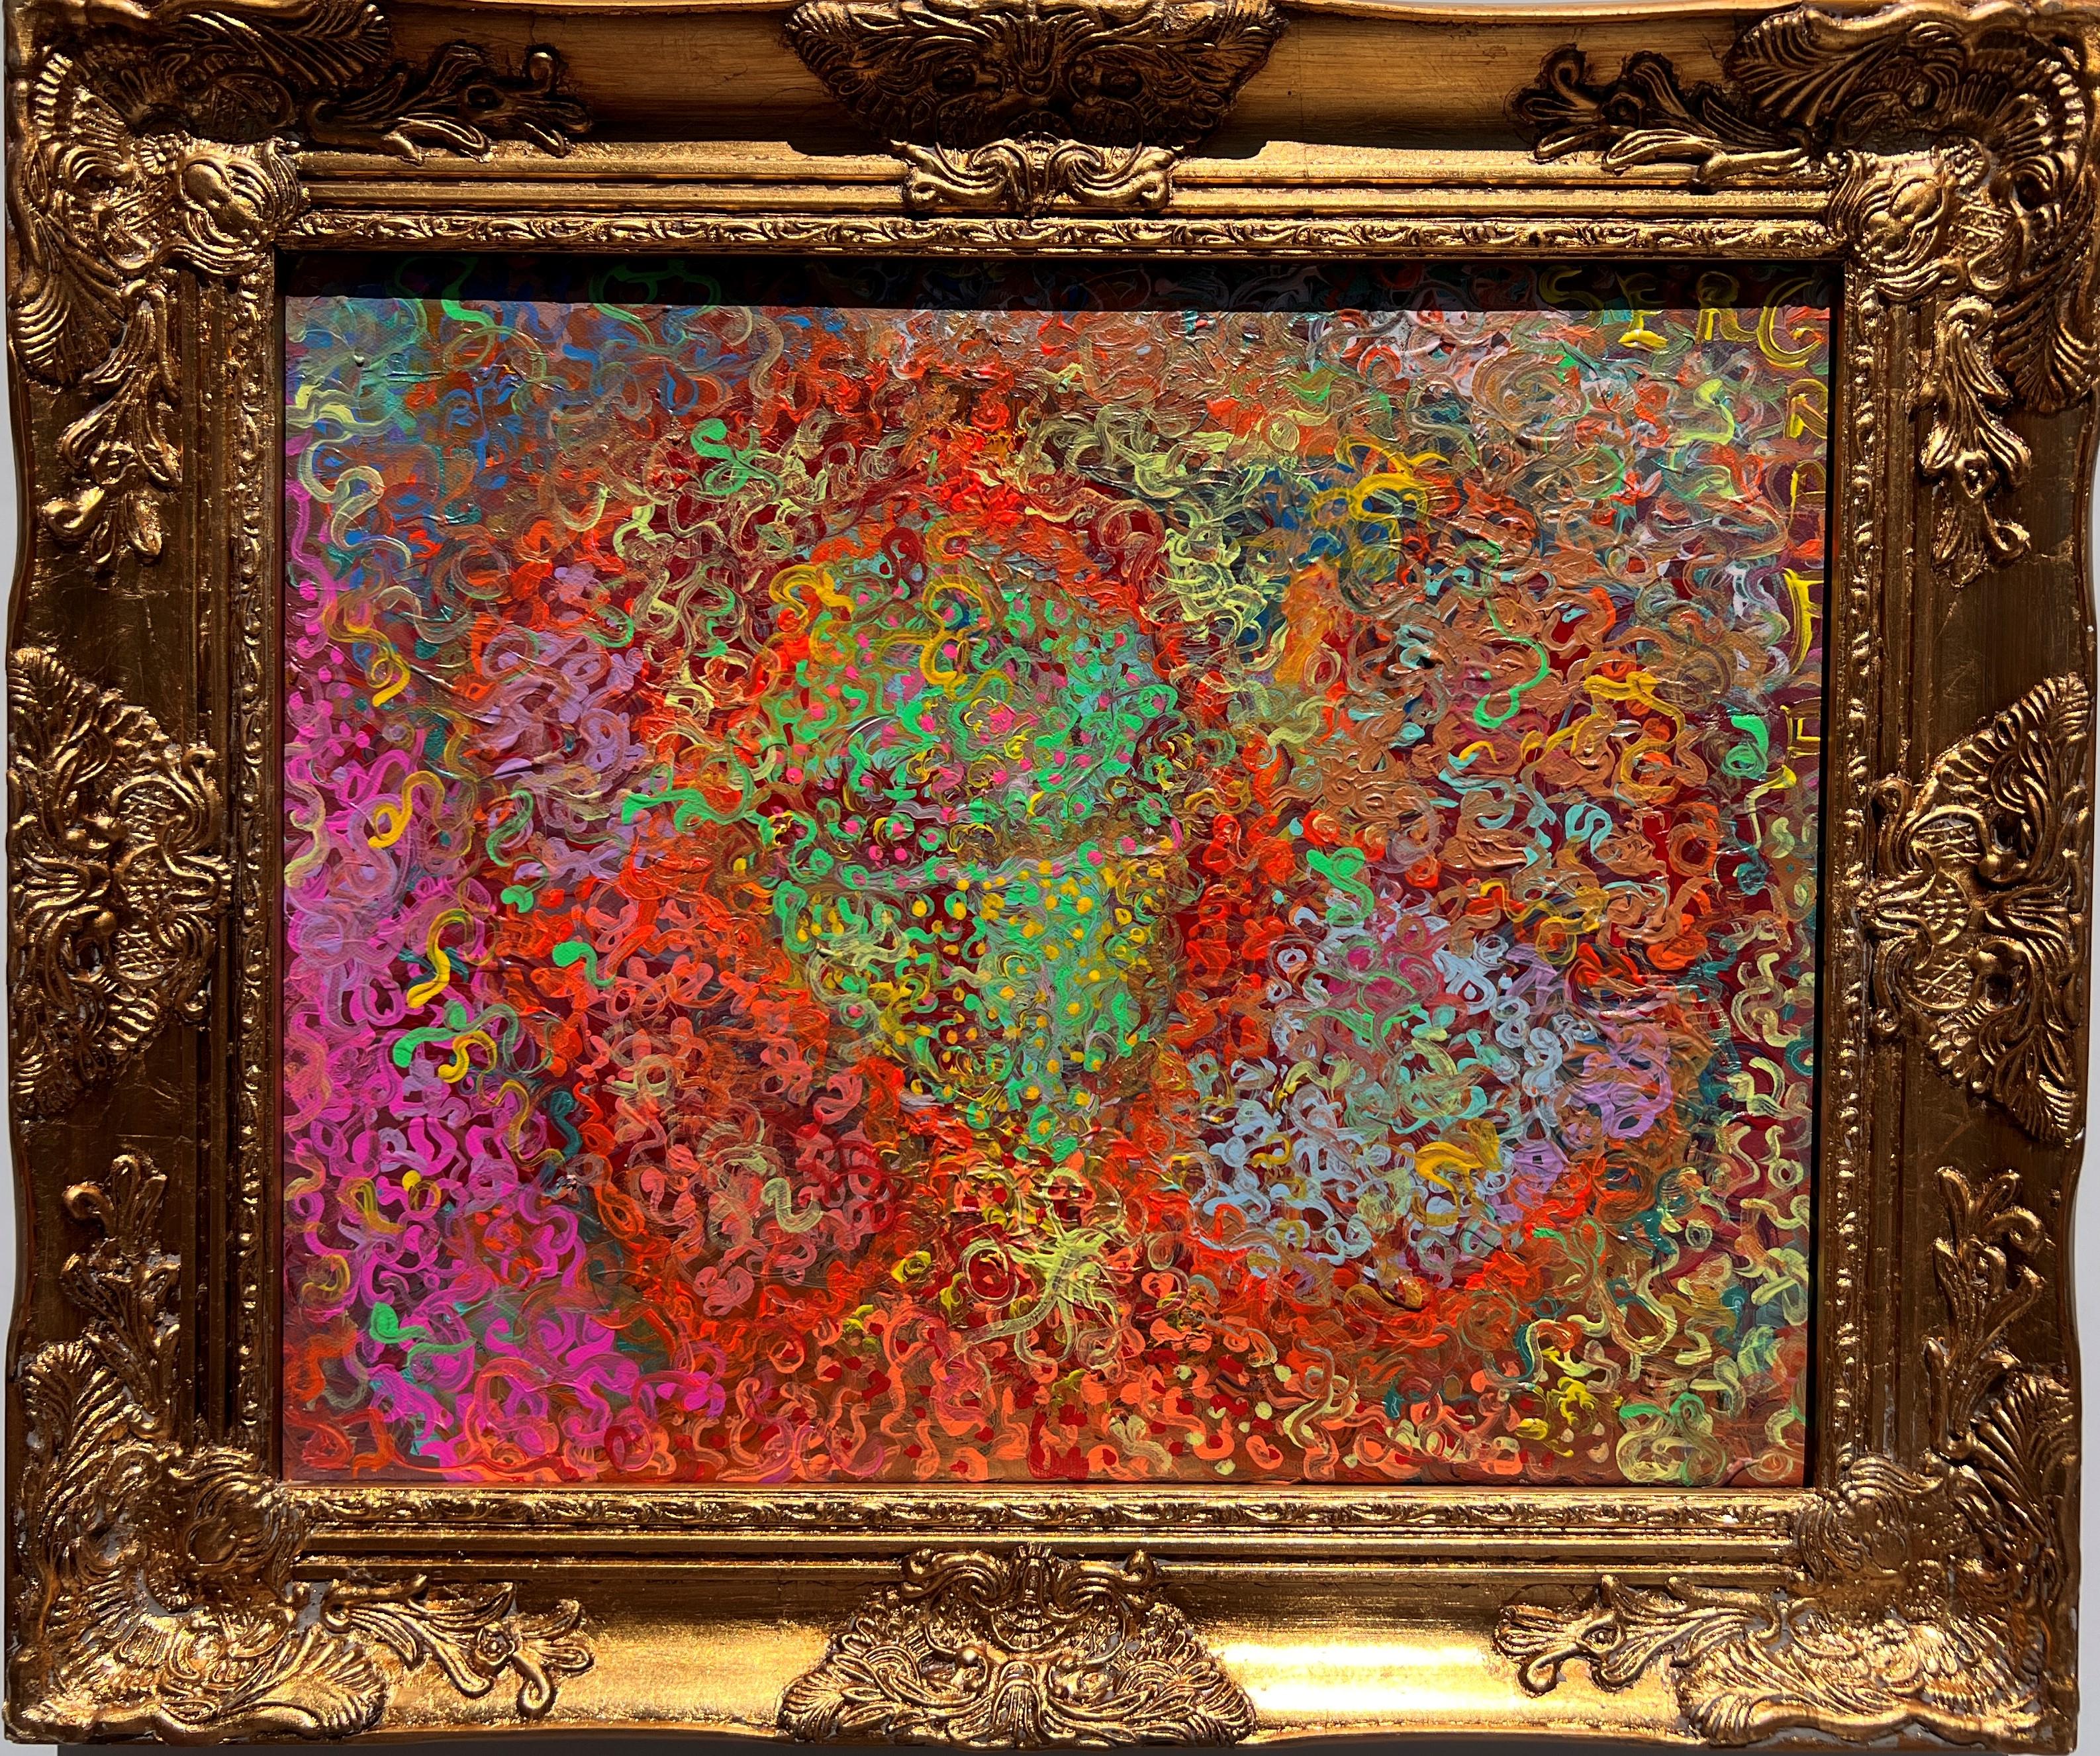 This is a unique original textured acrylic painting on canvas in a fantasy abstract style by Serg Graff Titled "Curly Curls". 

 It comes signed, dated, and with a COA (Certificate of Authenticity). 

 Presented in an ornate gold frame. 

 Excellent